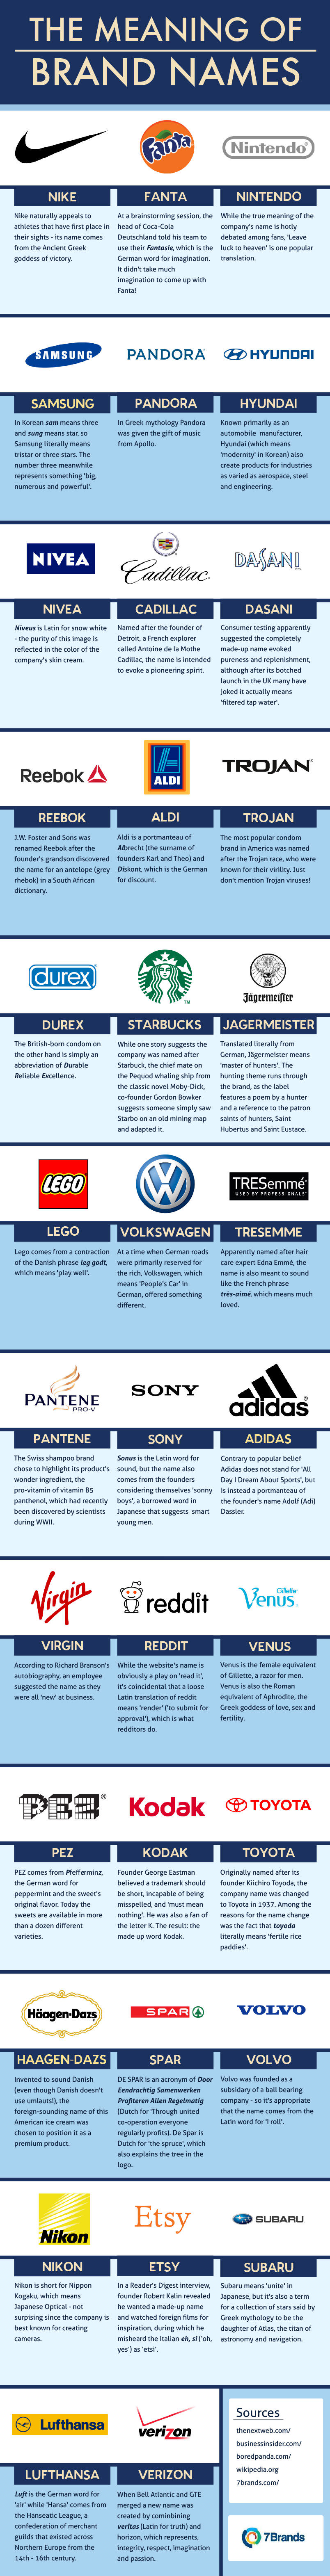 The Meaning of Brand Names